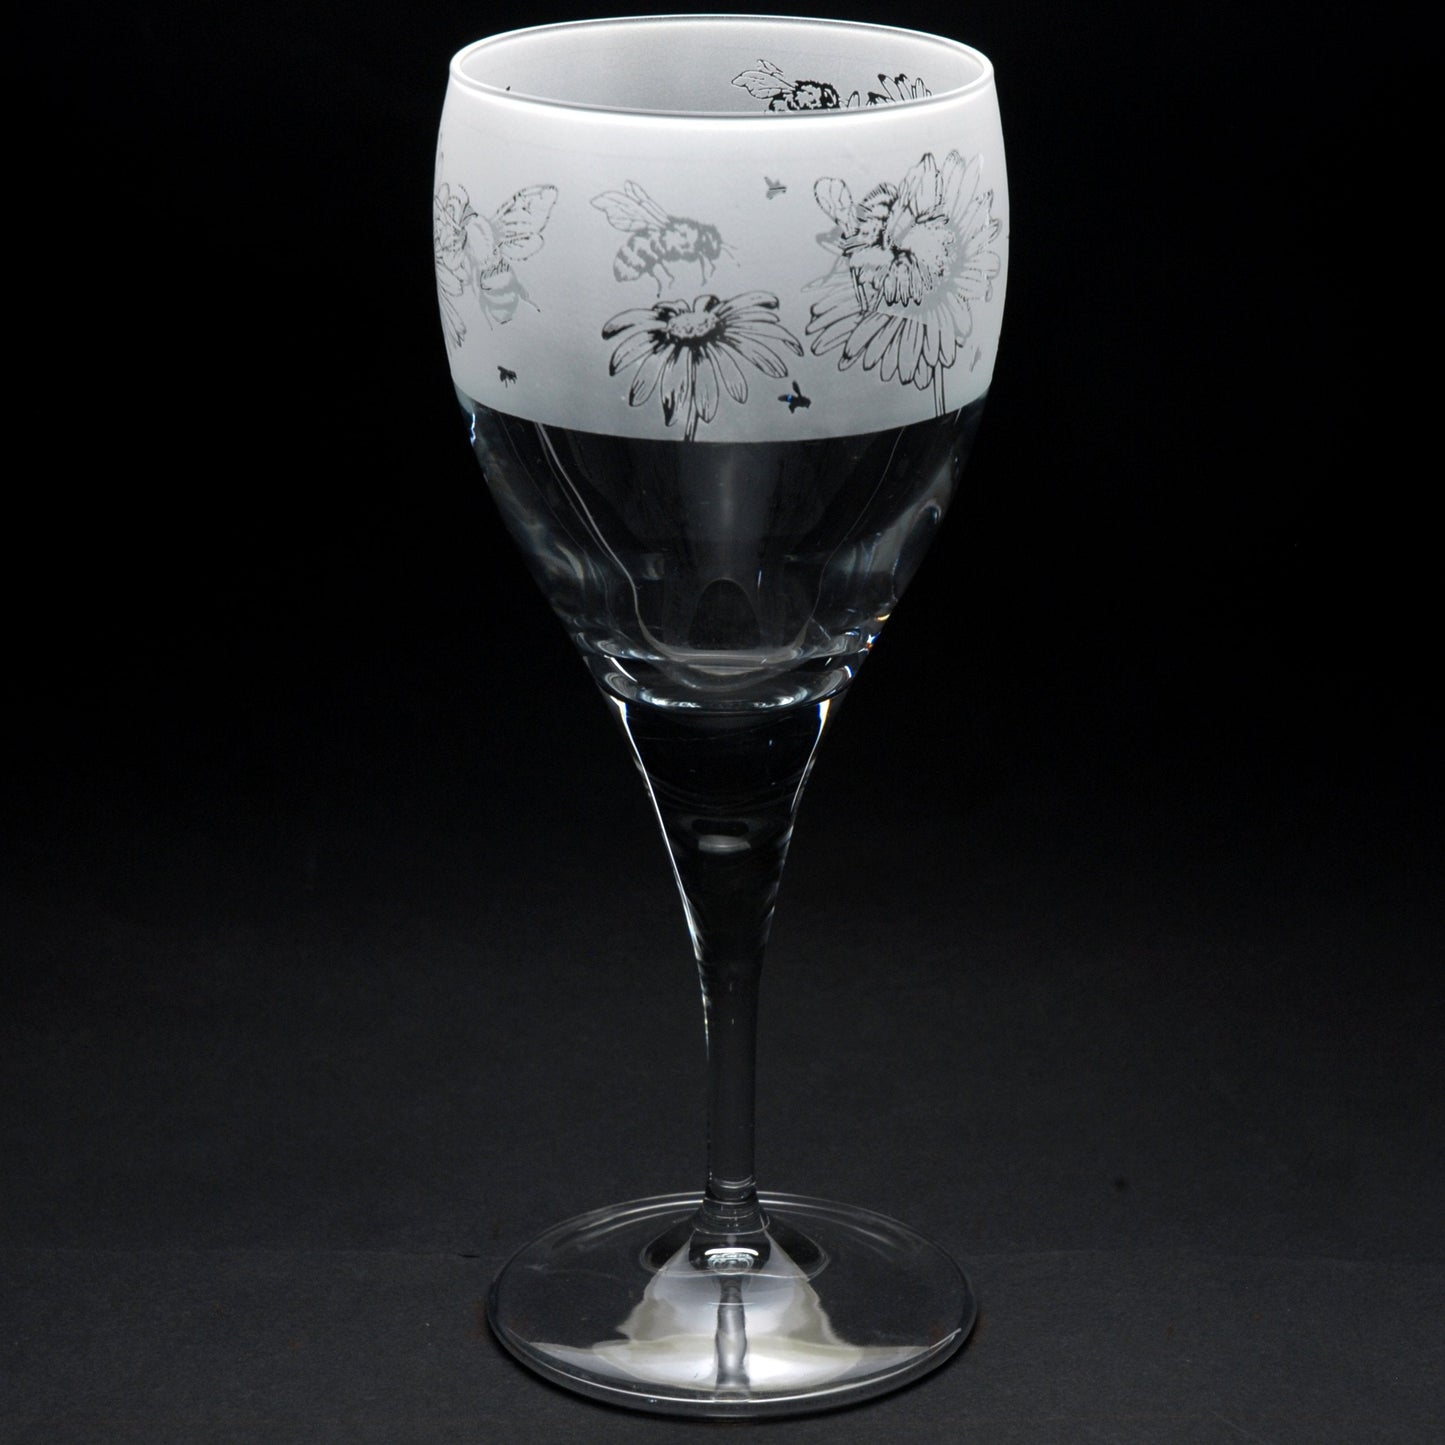 Bee Crystal Wine Glass - Hand Etched/Engraved Gift